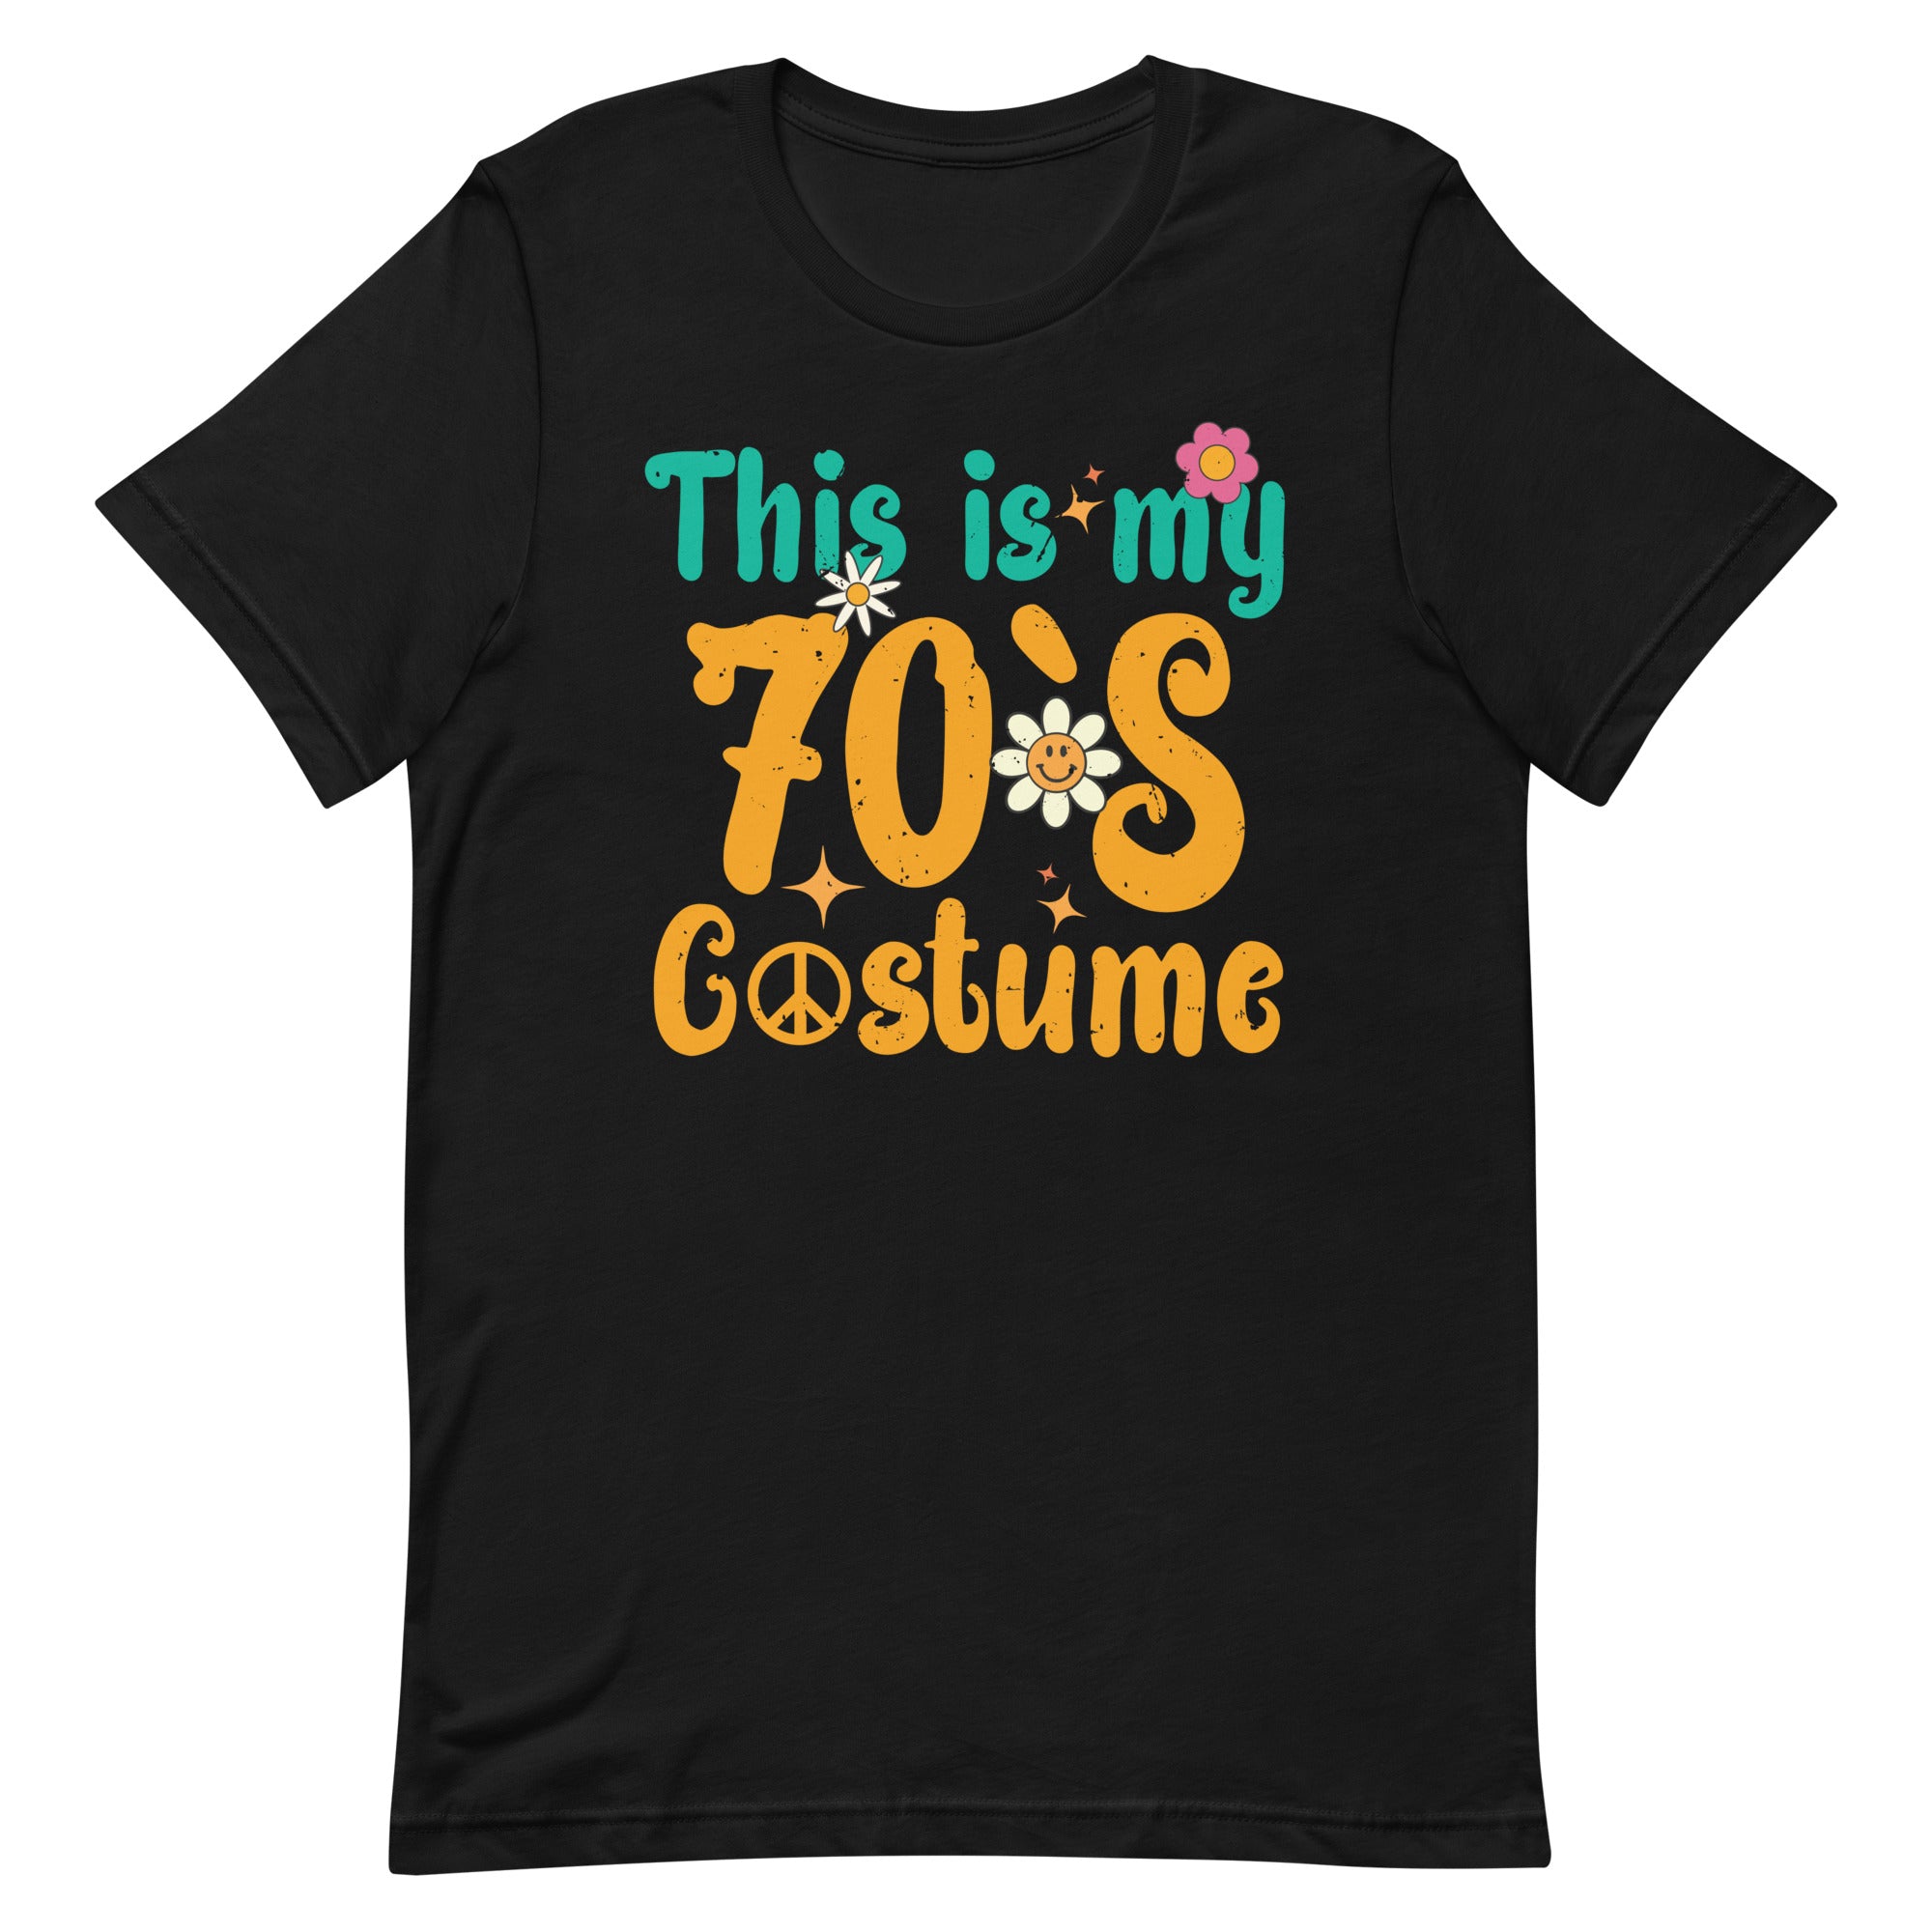 70s Outfit For Women & Men, This Is My 70s Costume Unisex t-shirt